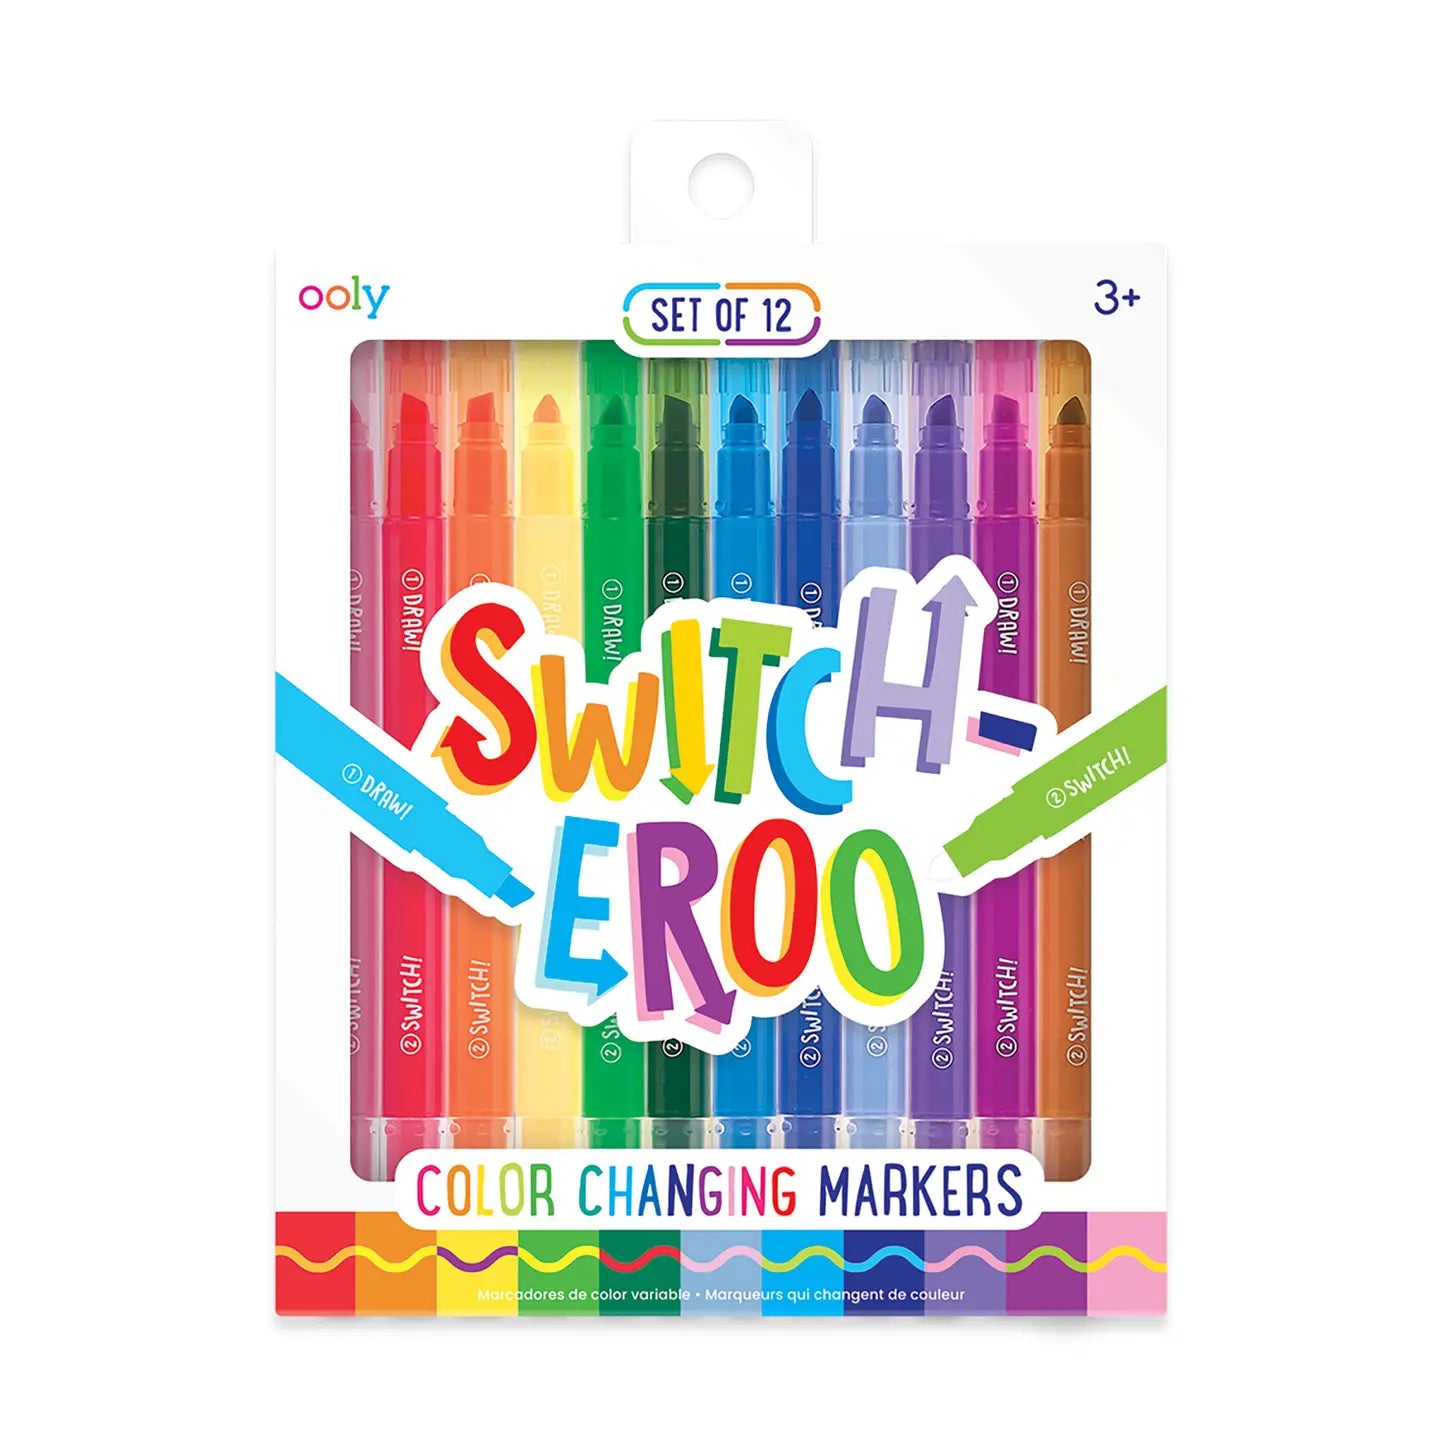 OOLY: Switch-Eroo! Color-Changing Markers 2.0